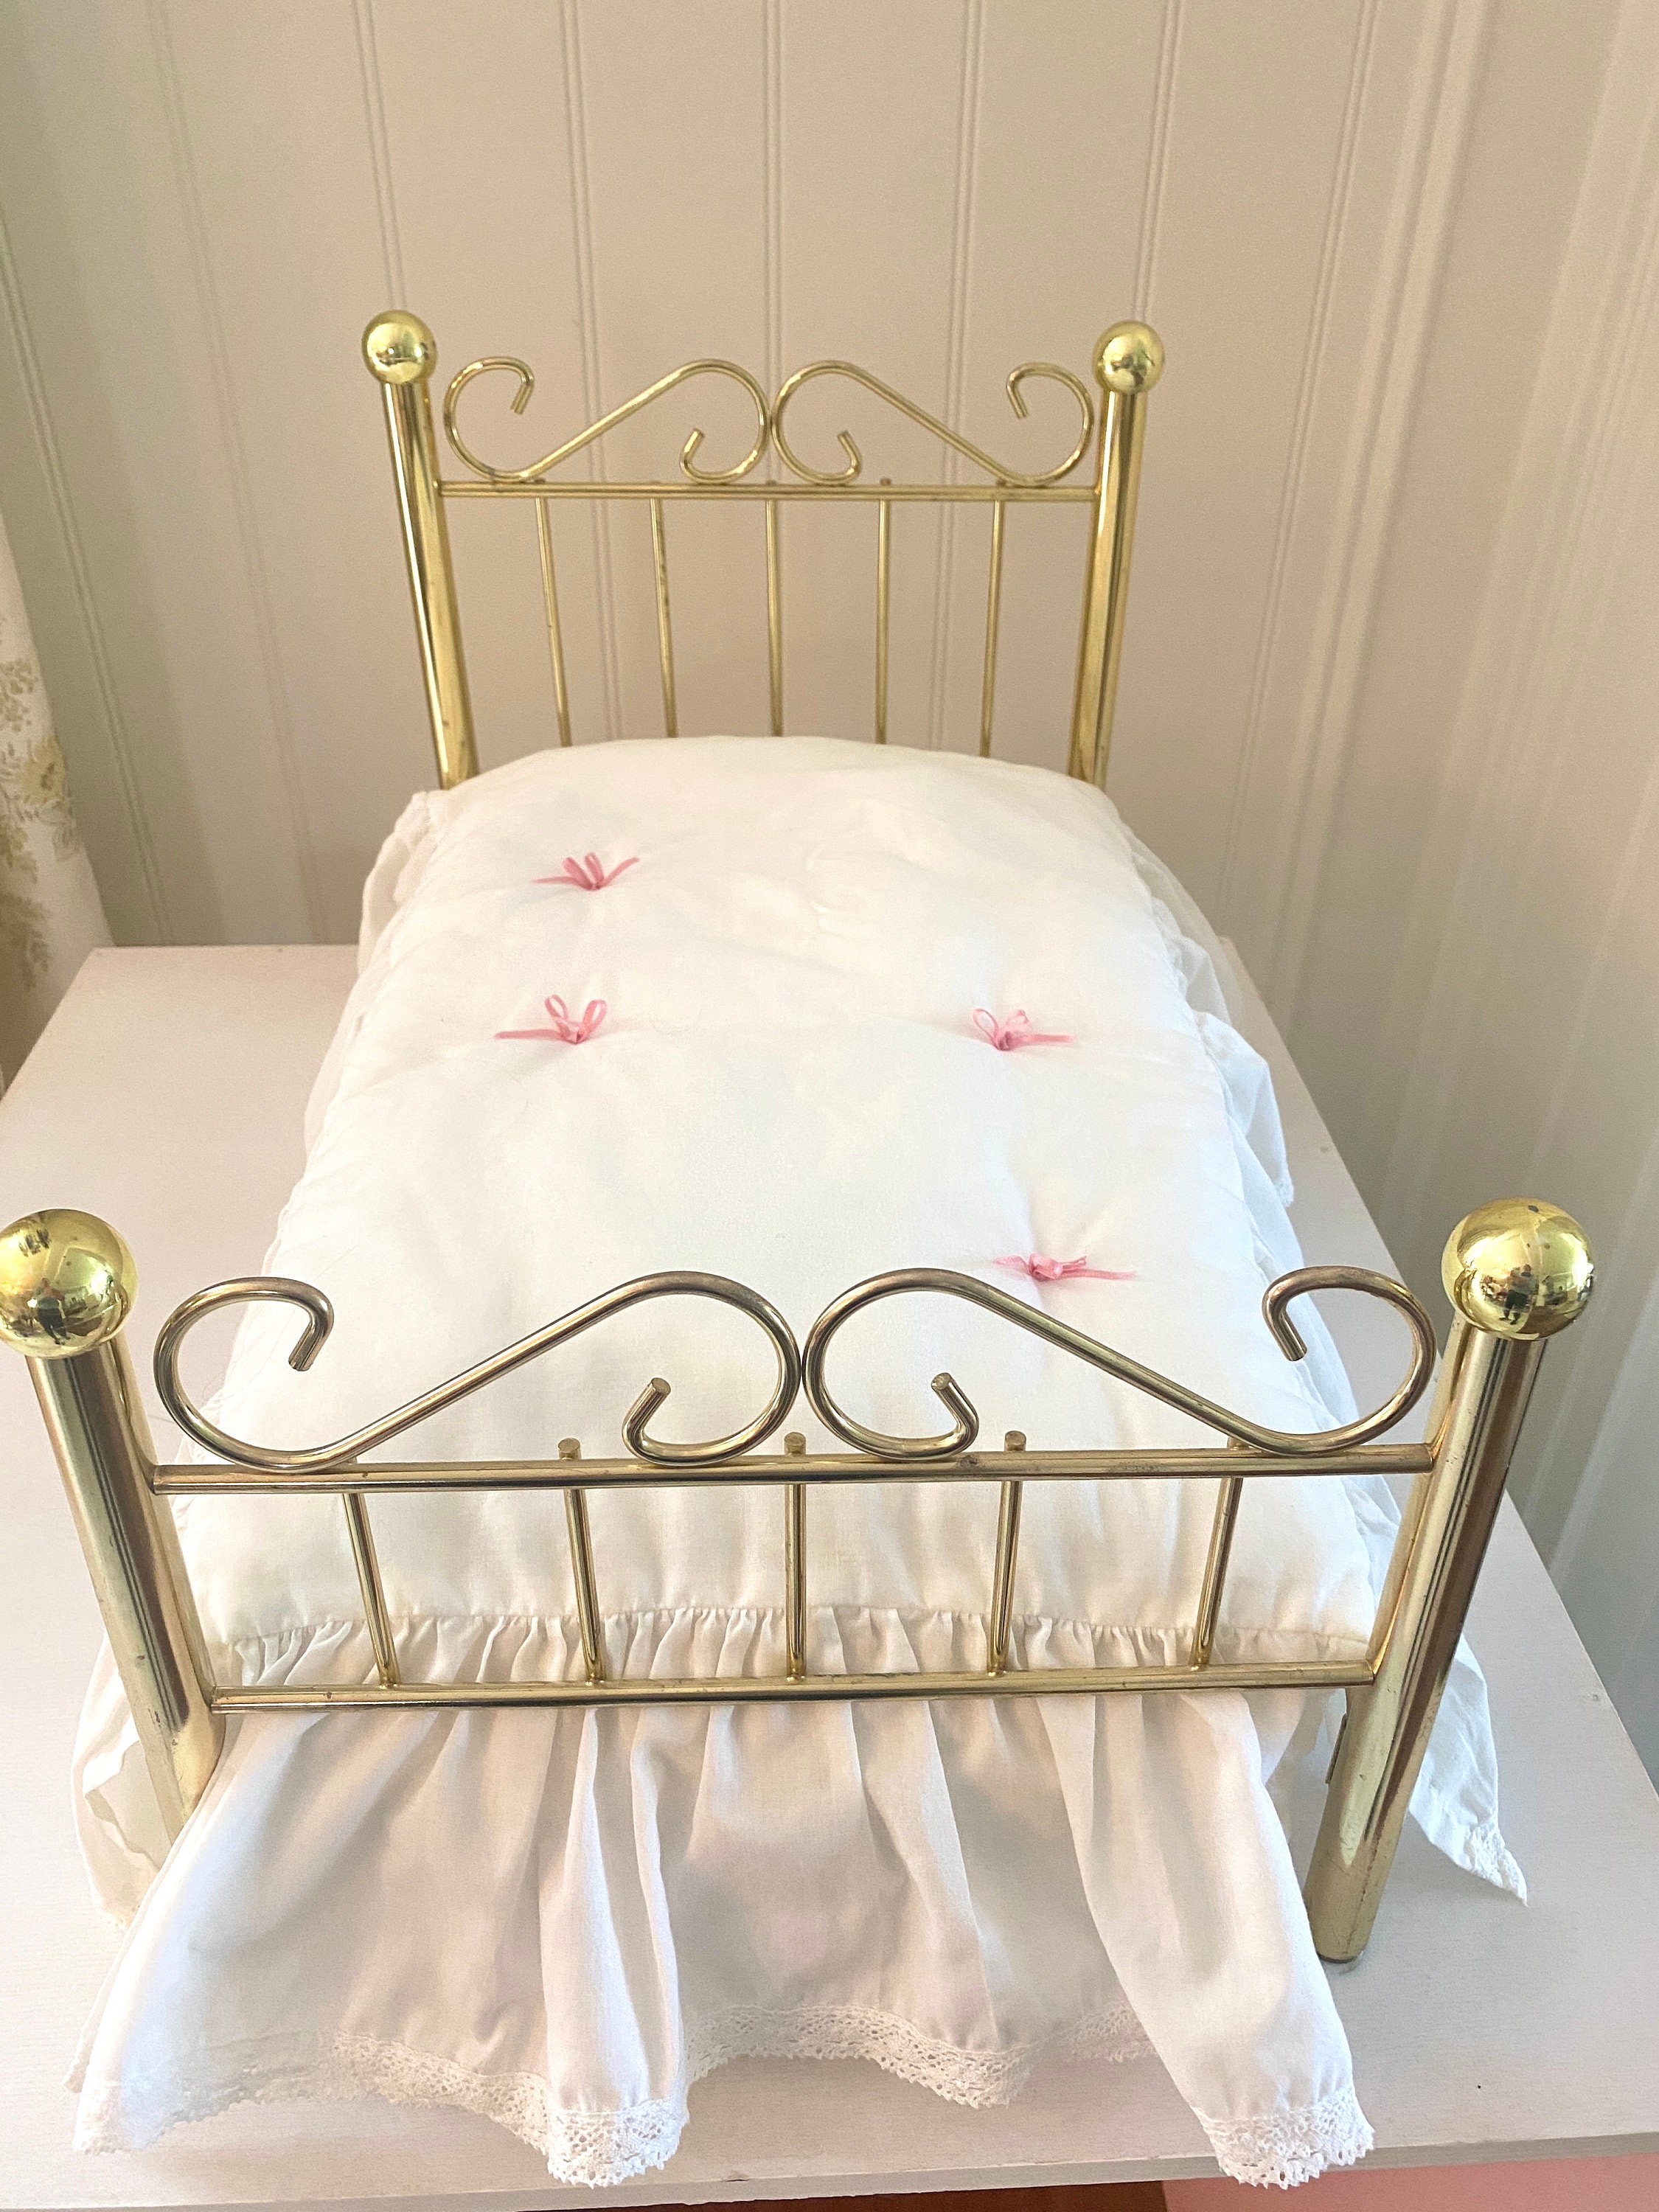 American Girl Pleasant Company Samantha Brass Bed with Bedding